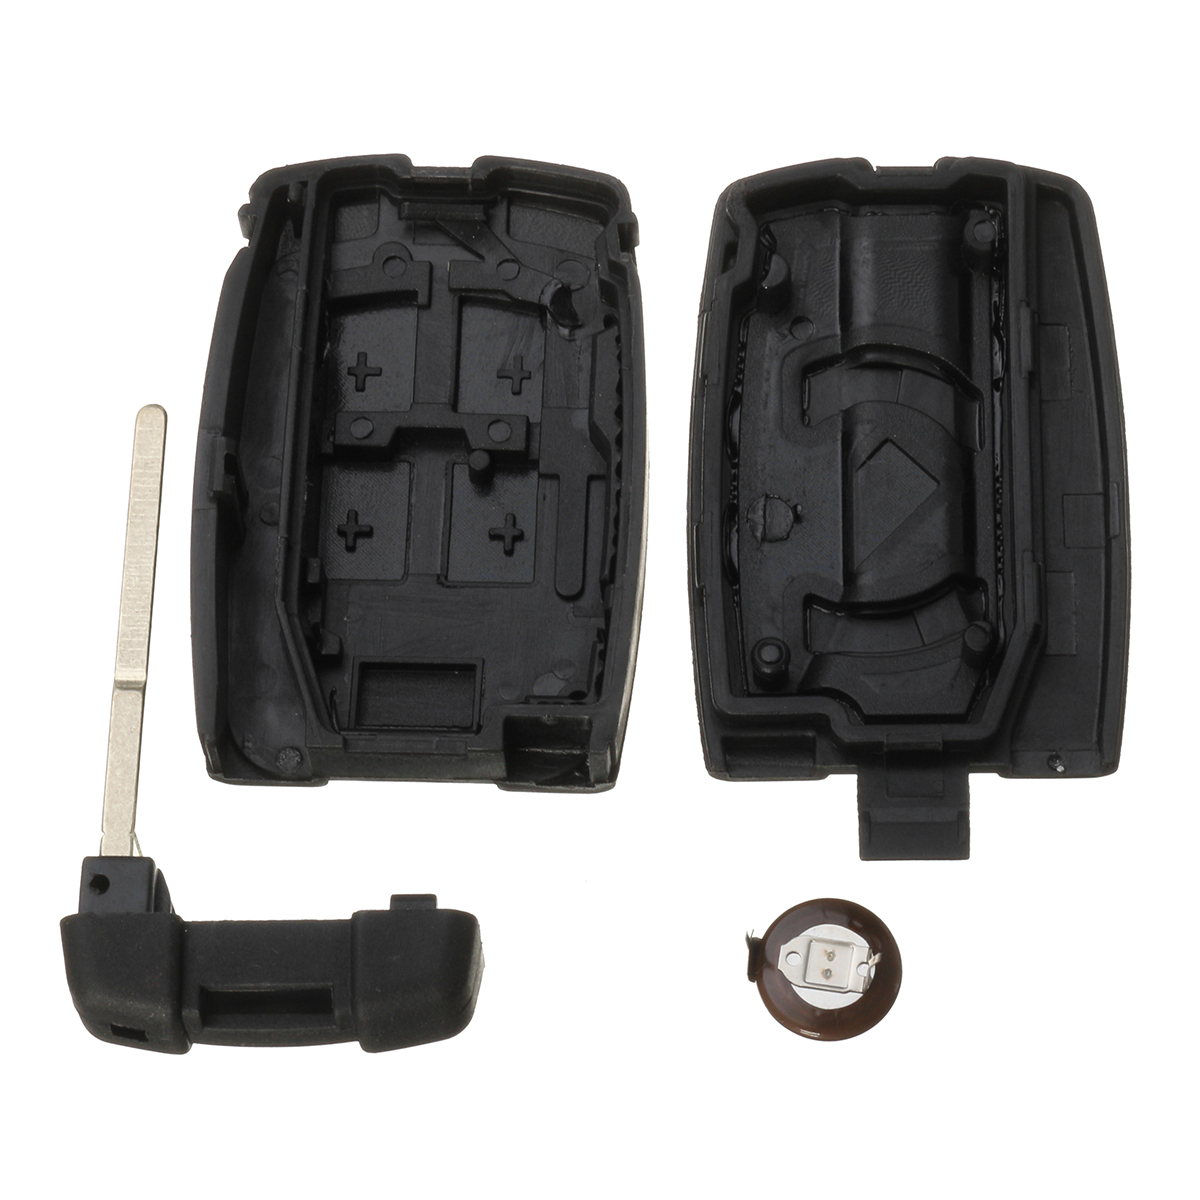 Automobile Locksmith Repair Kit for Land Rover Freelander 2 5 Button Smart Remote Key Fob Shell Case Switches VL2330 Battery